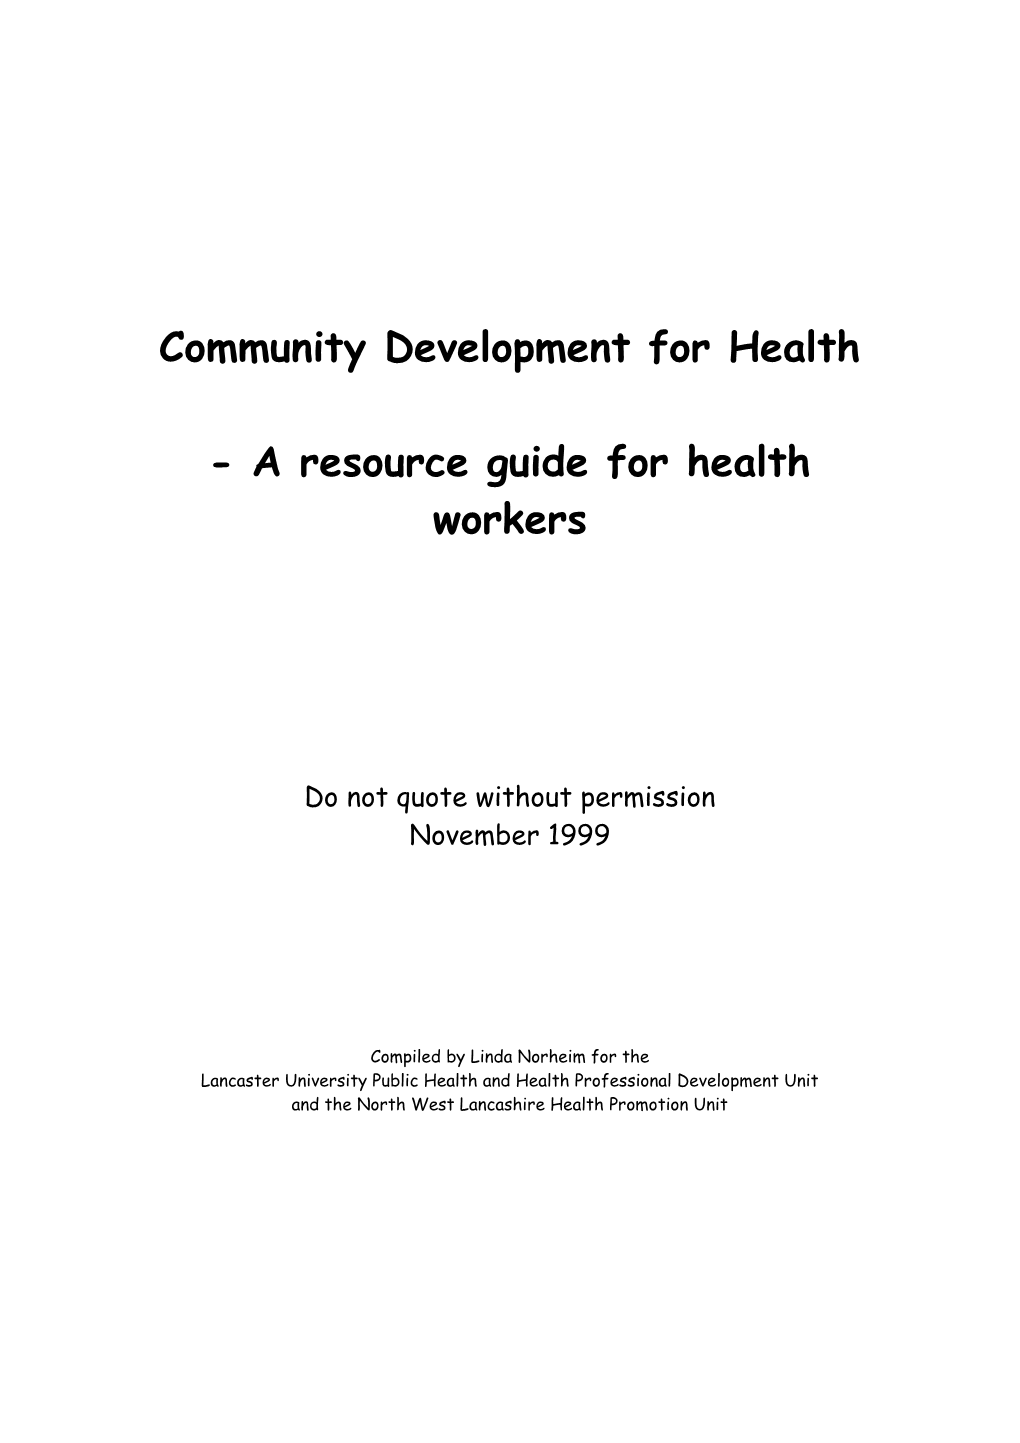 Community Approaches for Health